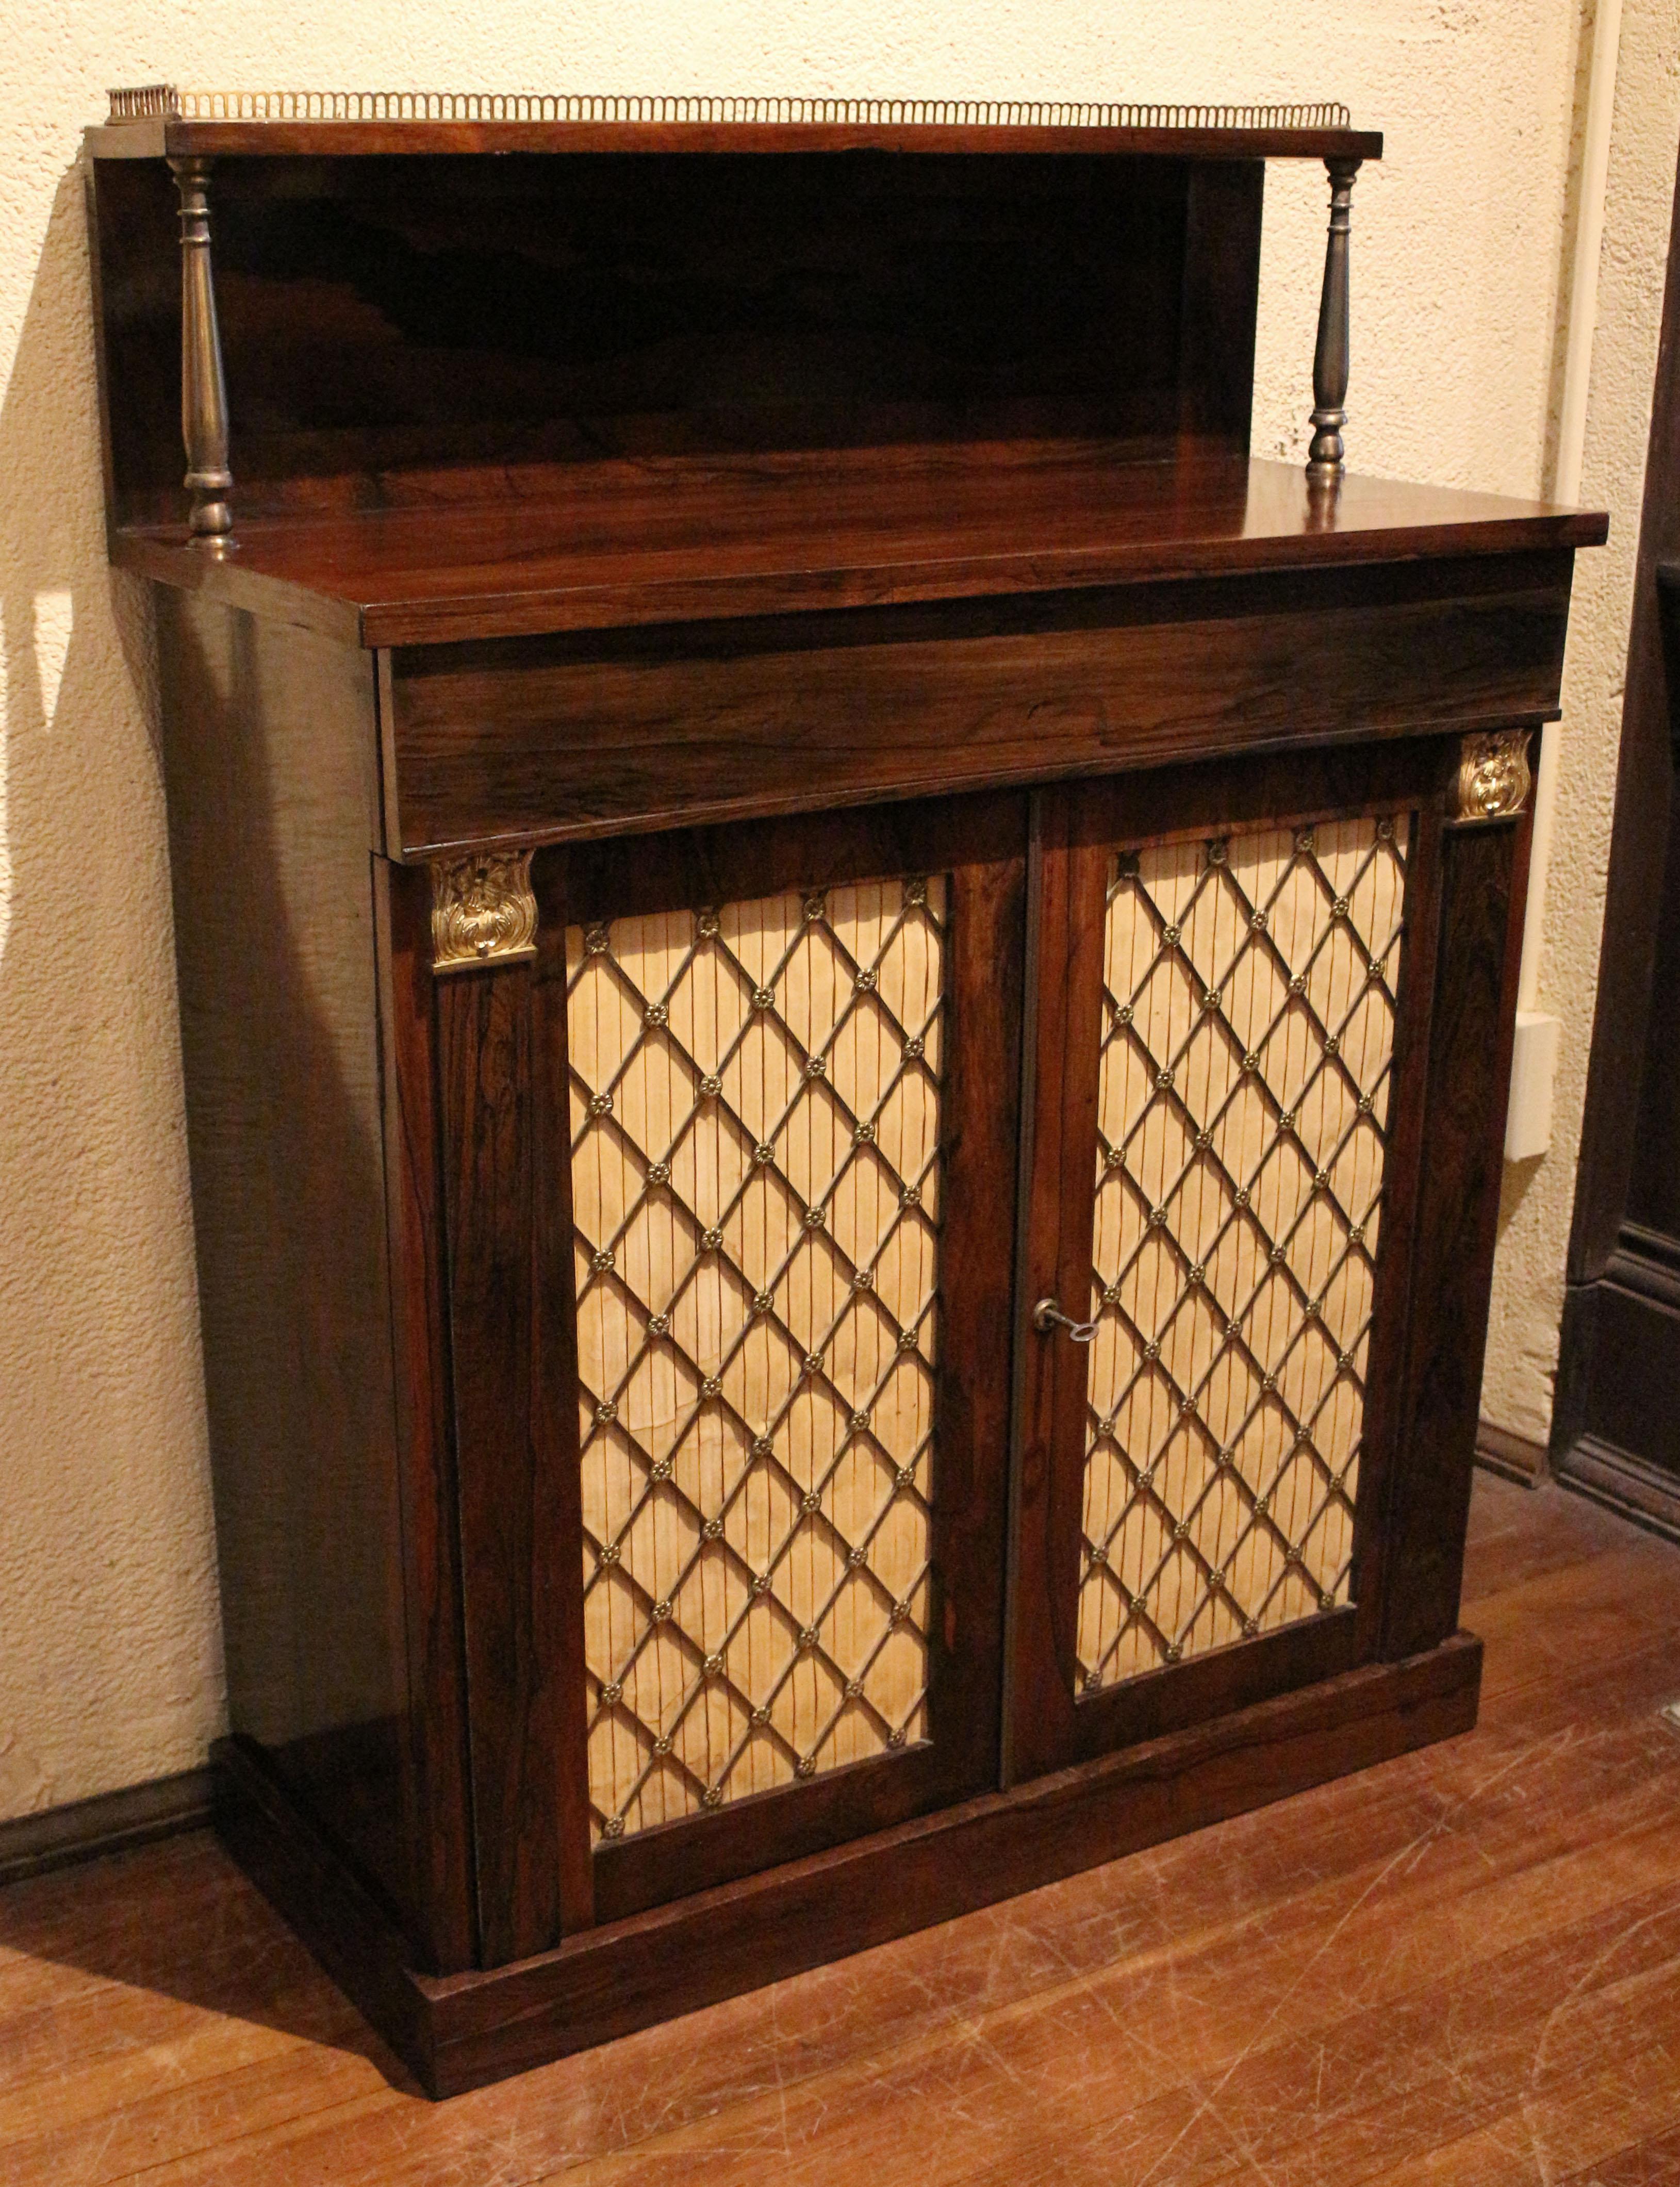 Circa 1815 Regency period chiffonier, English. Rosewood with oak secondary wood. Brass upper gallery edge, well turned brass supports for the upper tier and brass grillwork for the double doors finished with a brass molded edge & Bramah lock.